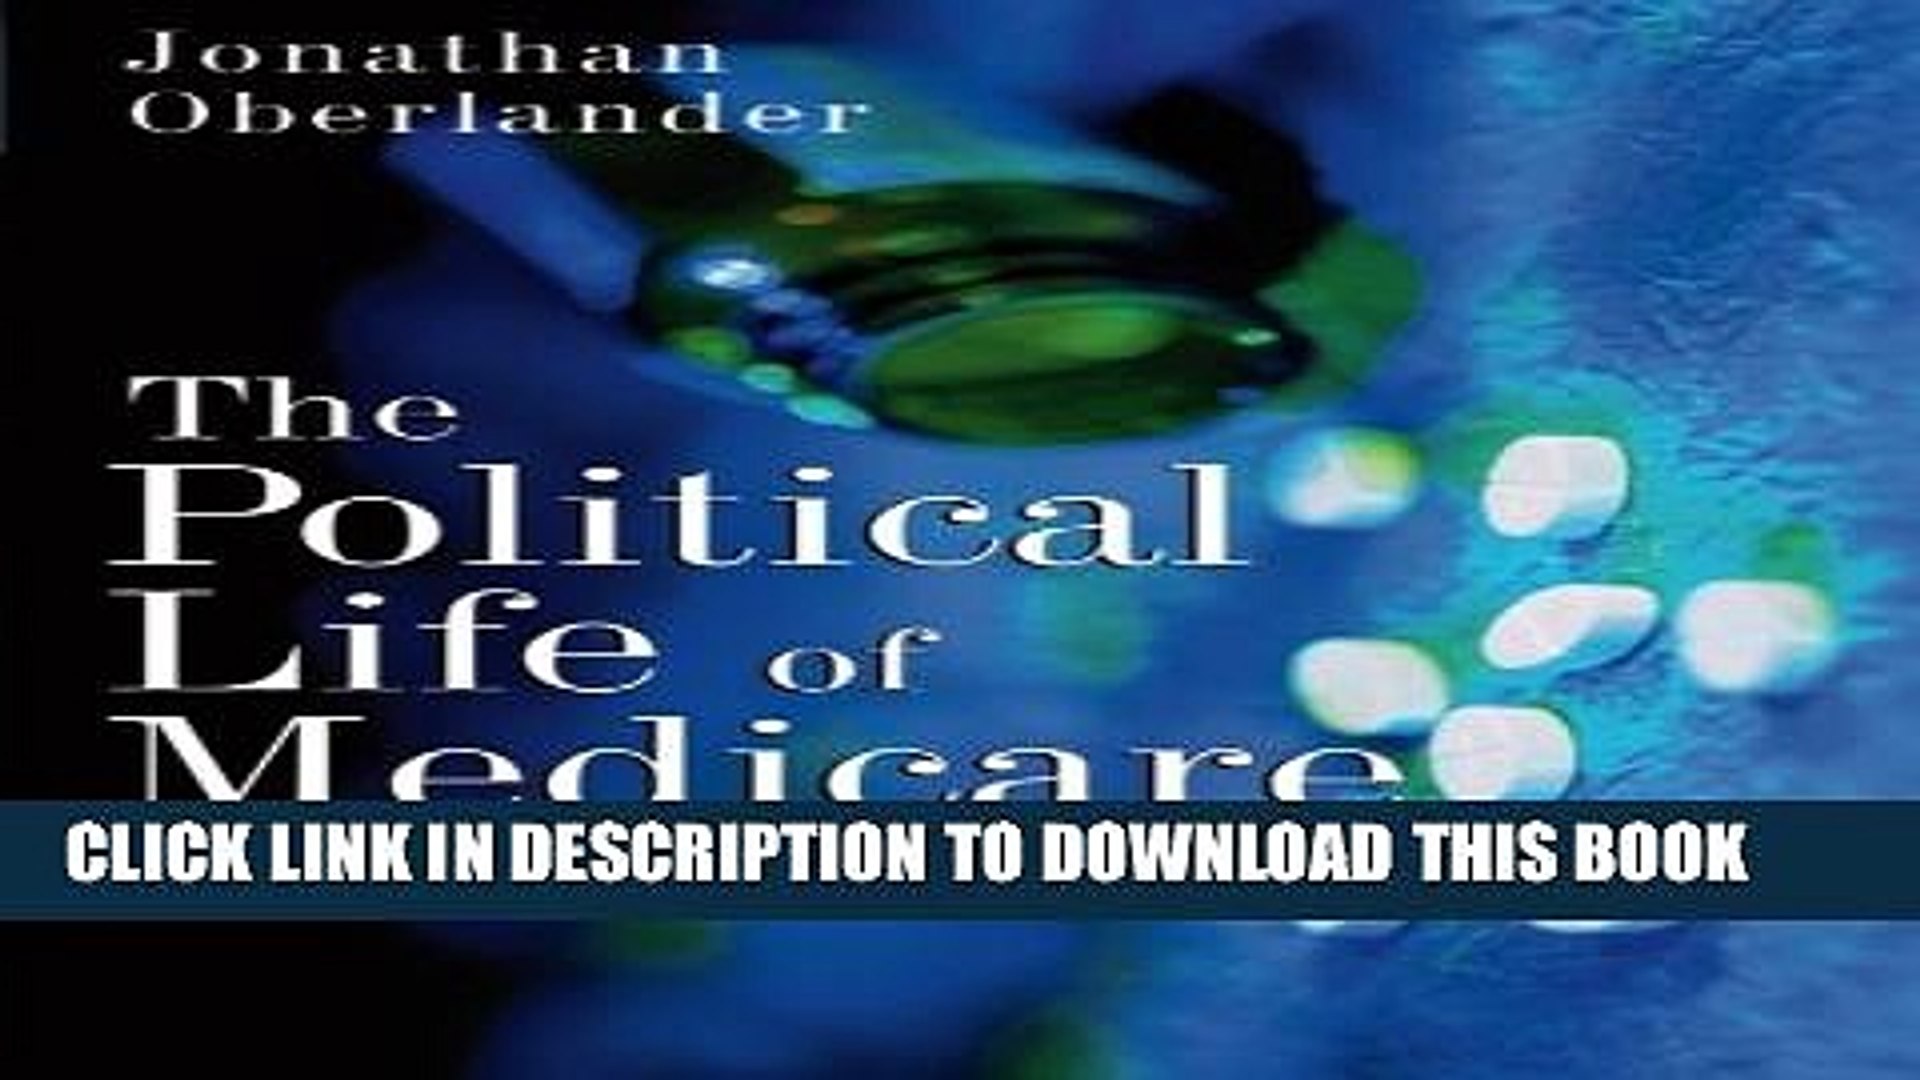 The Political Life of Medicare (American Politics and Political Economy) Paperback